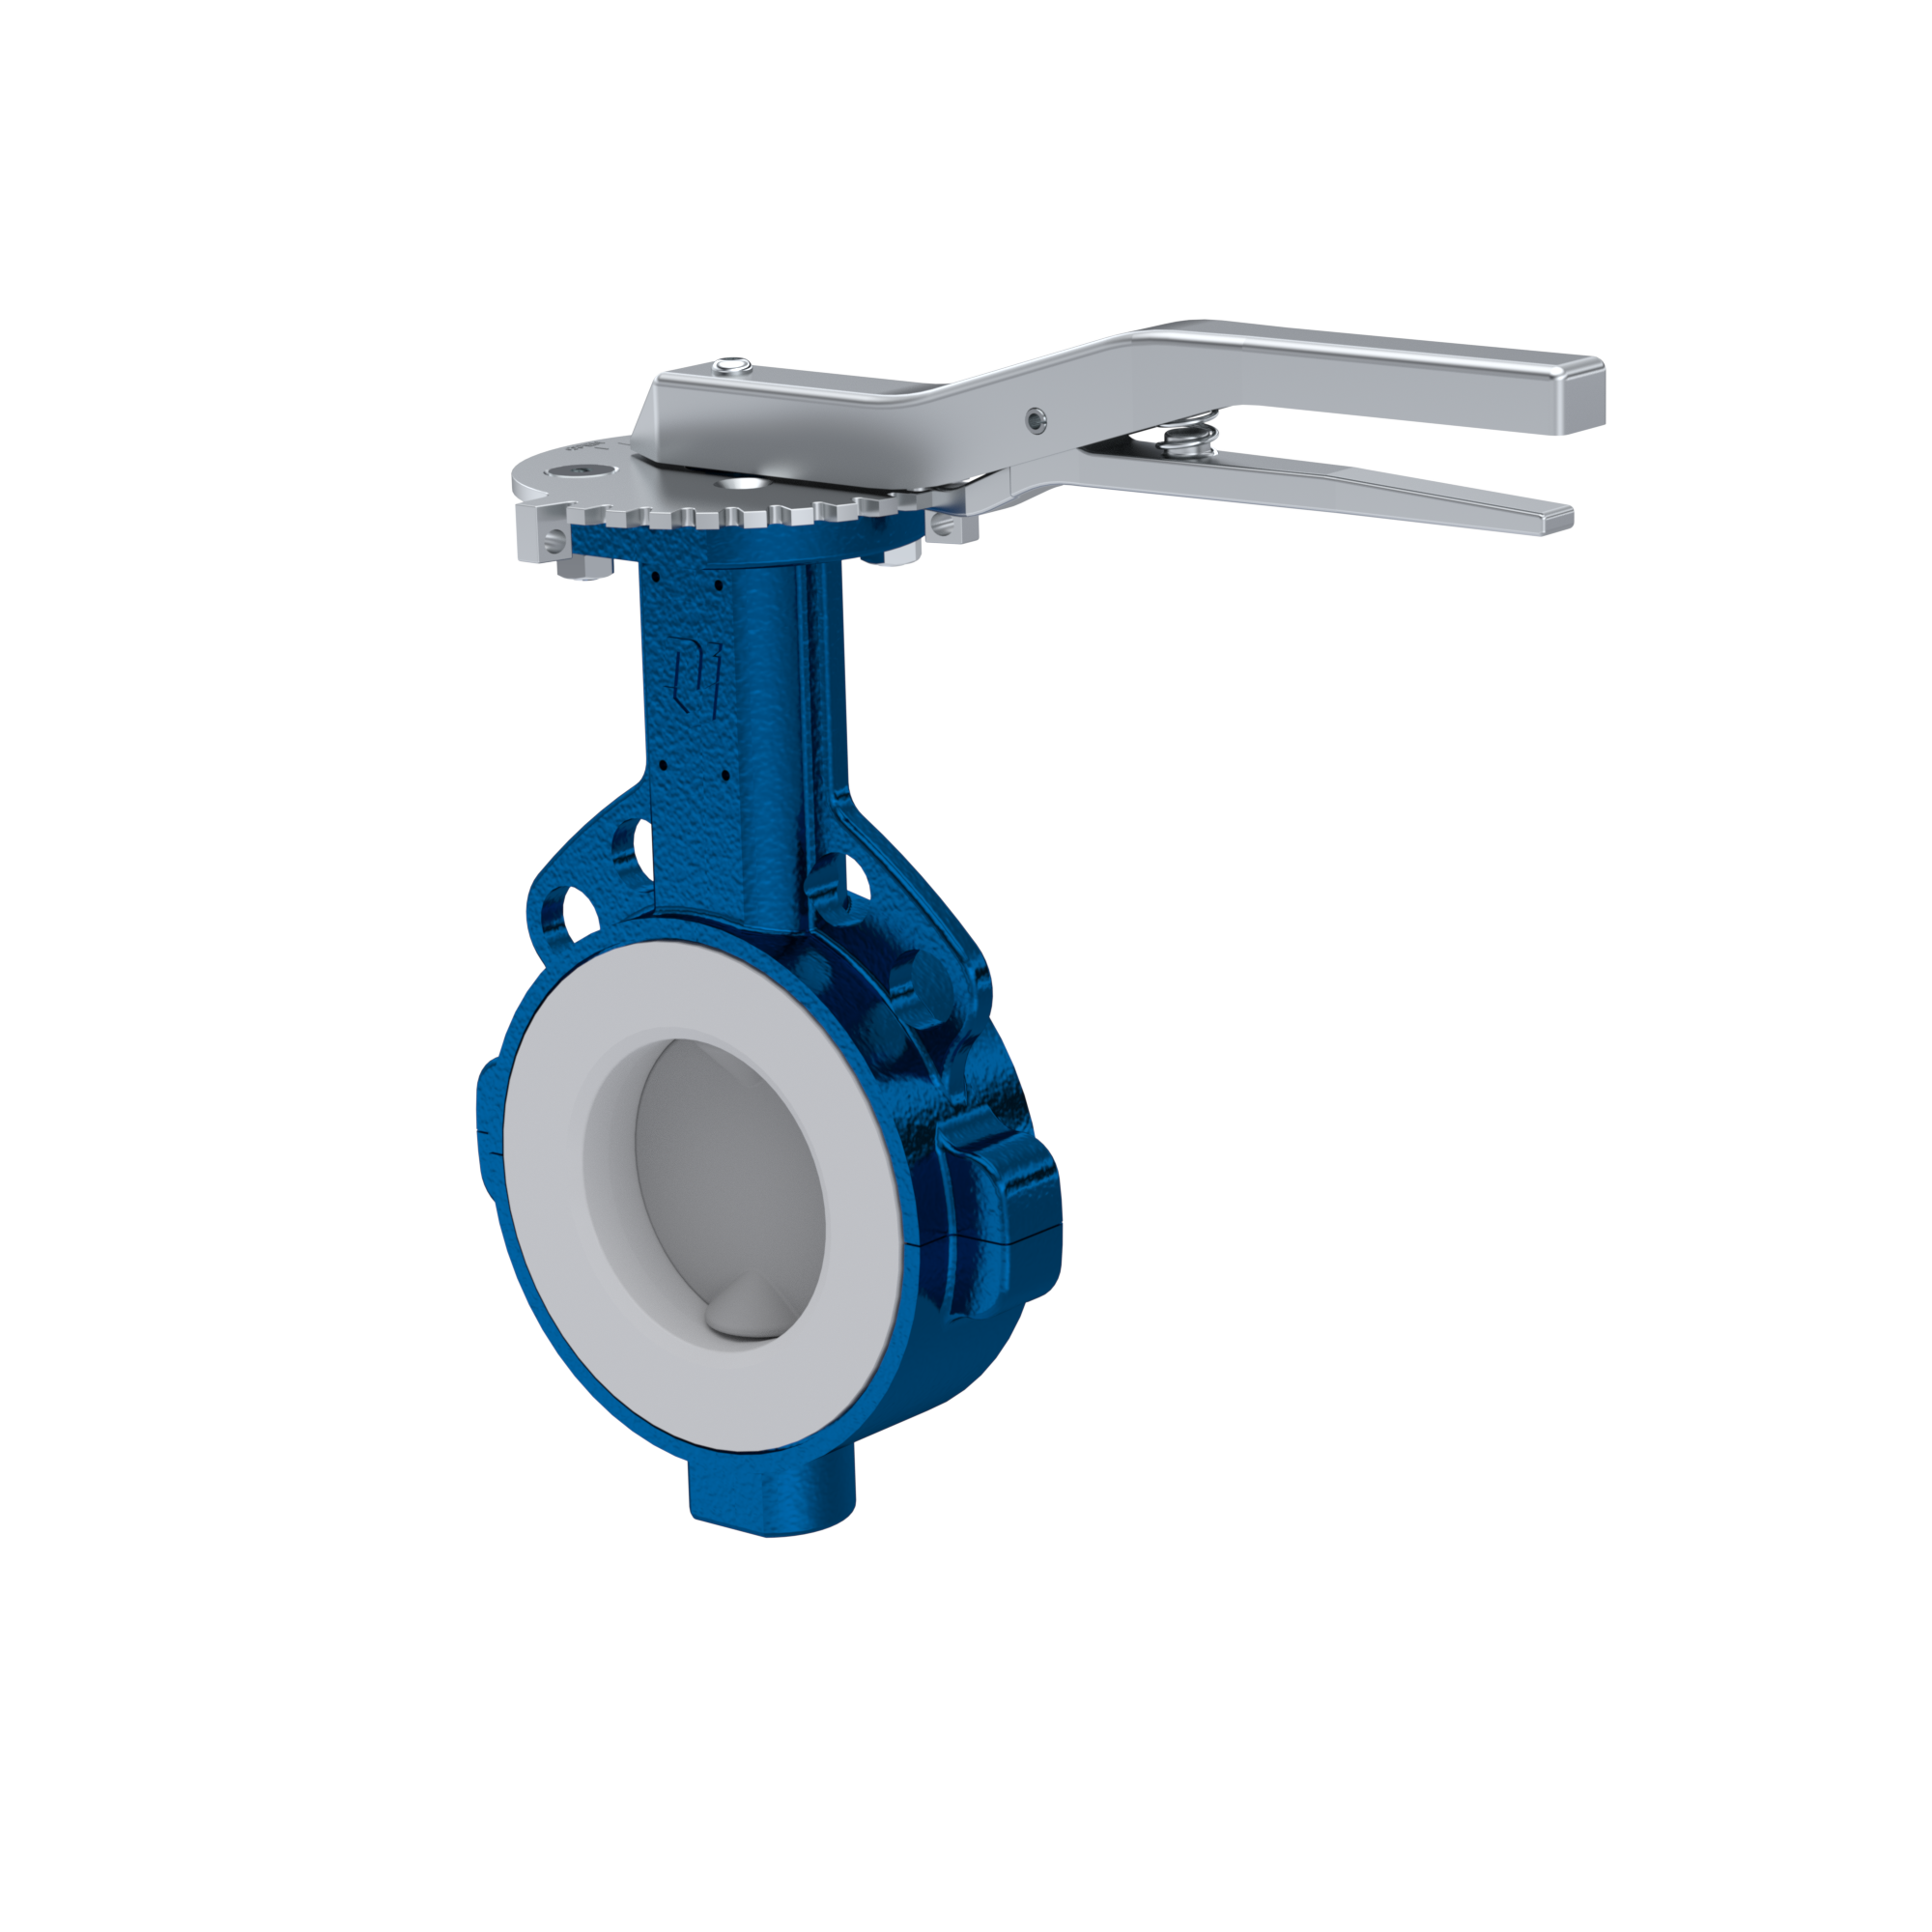 Butterfly-valve PTFE AK09 DN100 ANSI150 lever silicone insert